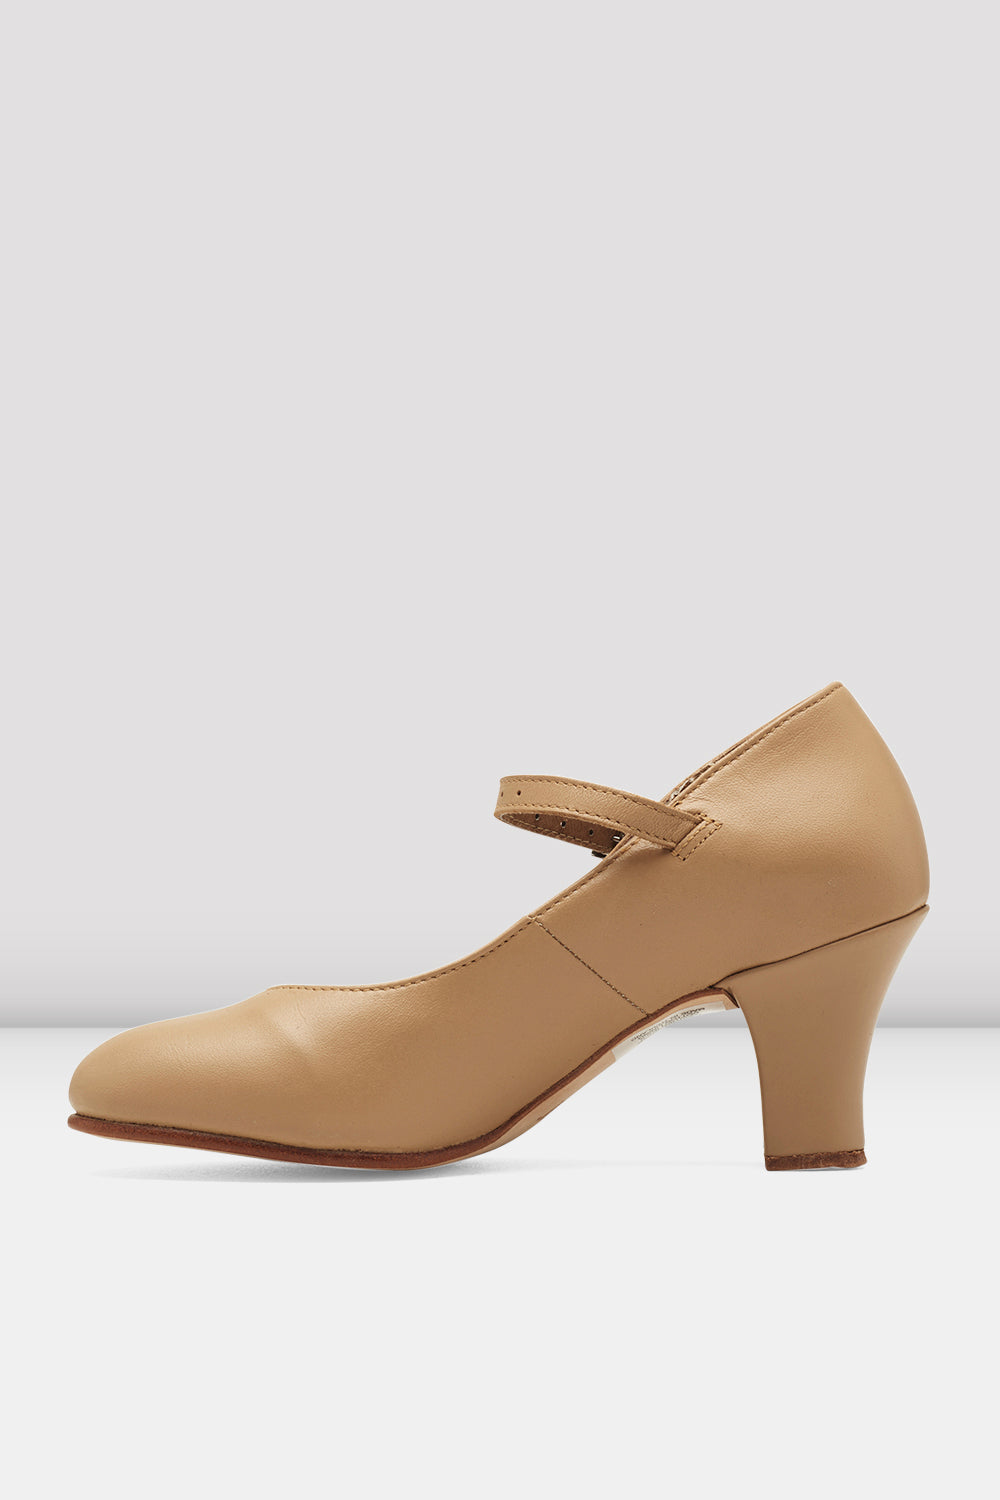 Ladies Cabaret Character Shoes, Tan | BLOCH USA